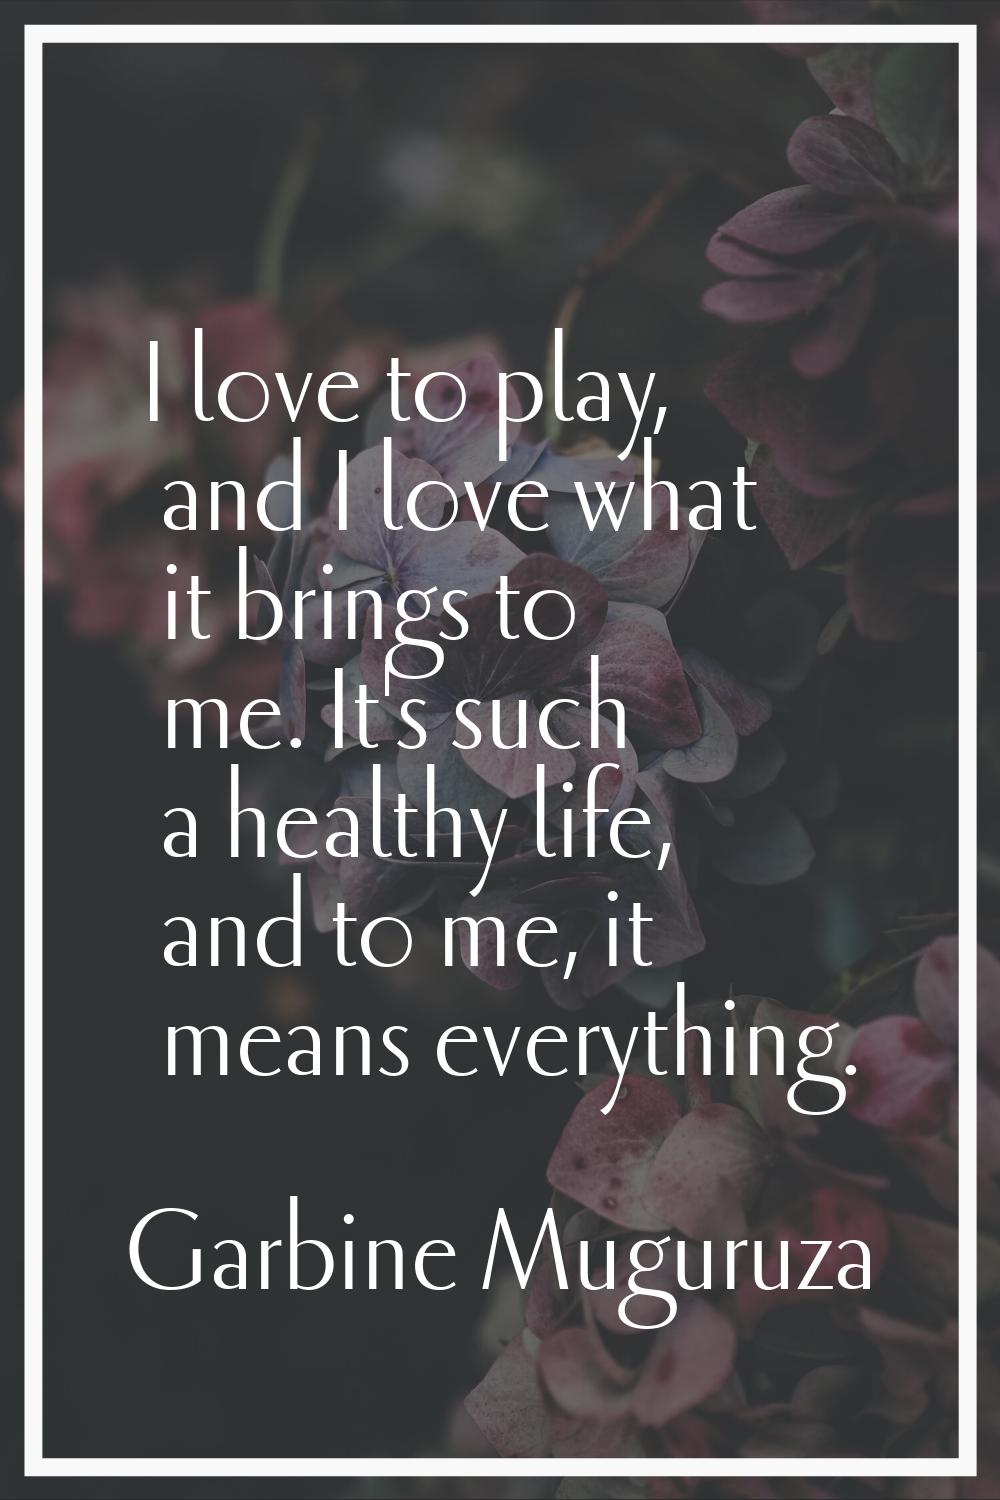 I love to play, and I love what it brings to me. It's such a healthy life, and to me, it means ever